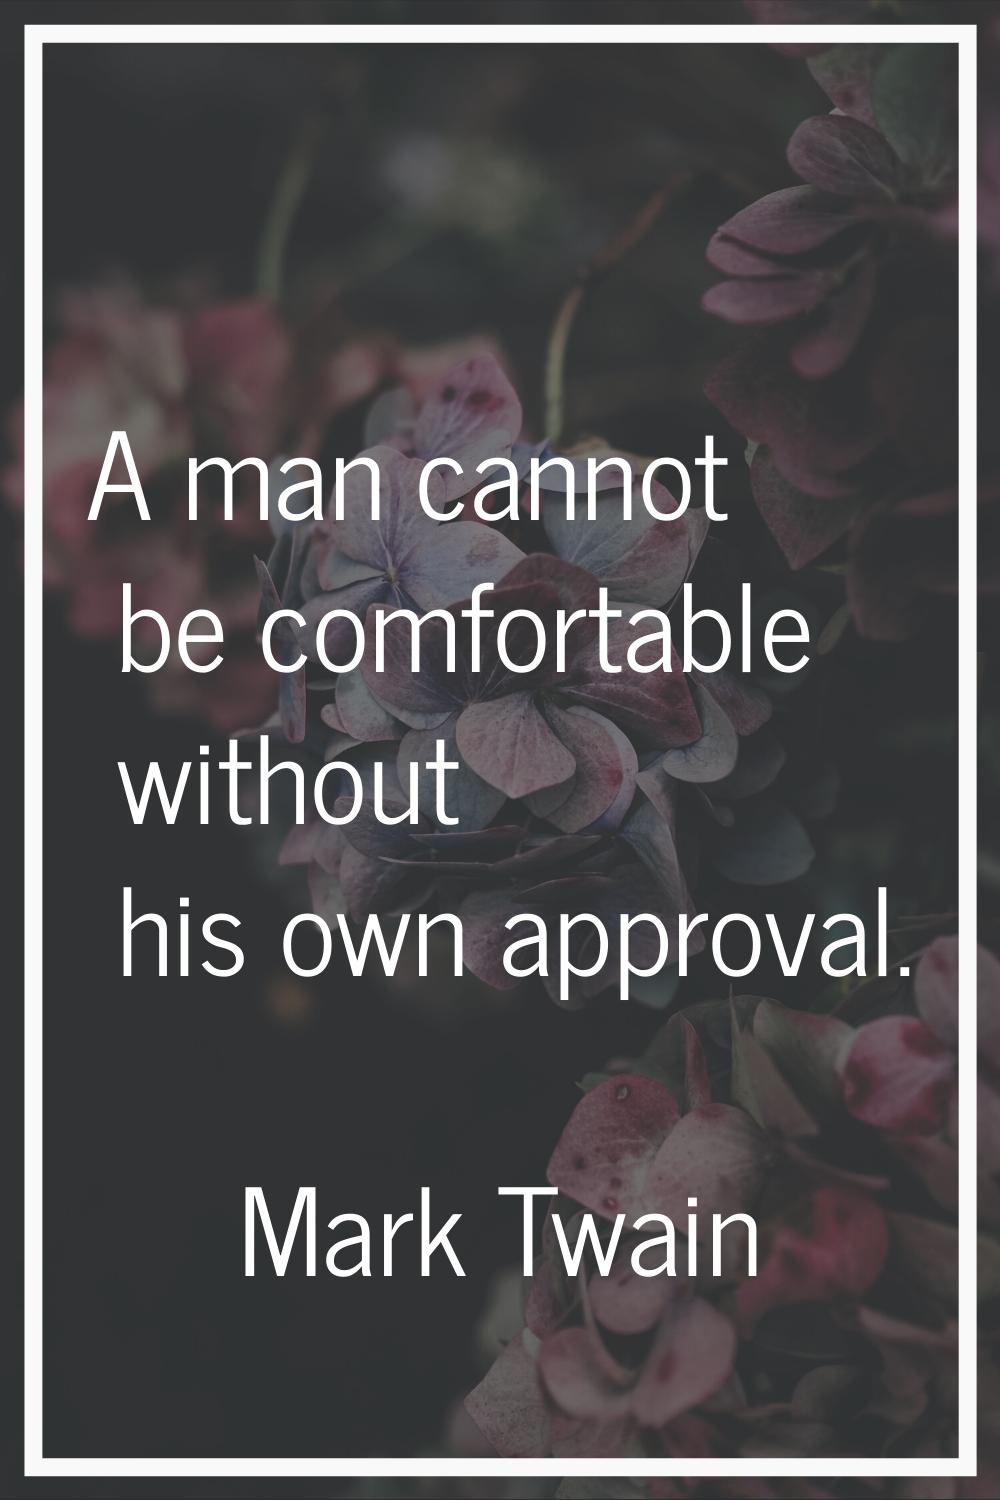 A man cannot be comfortable without his own approval.